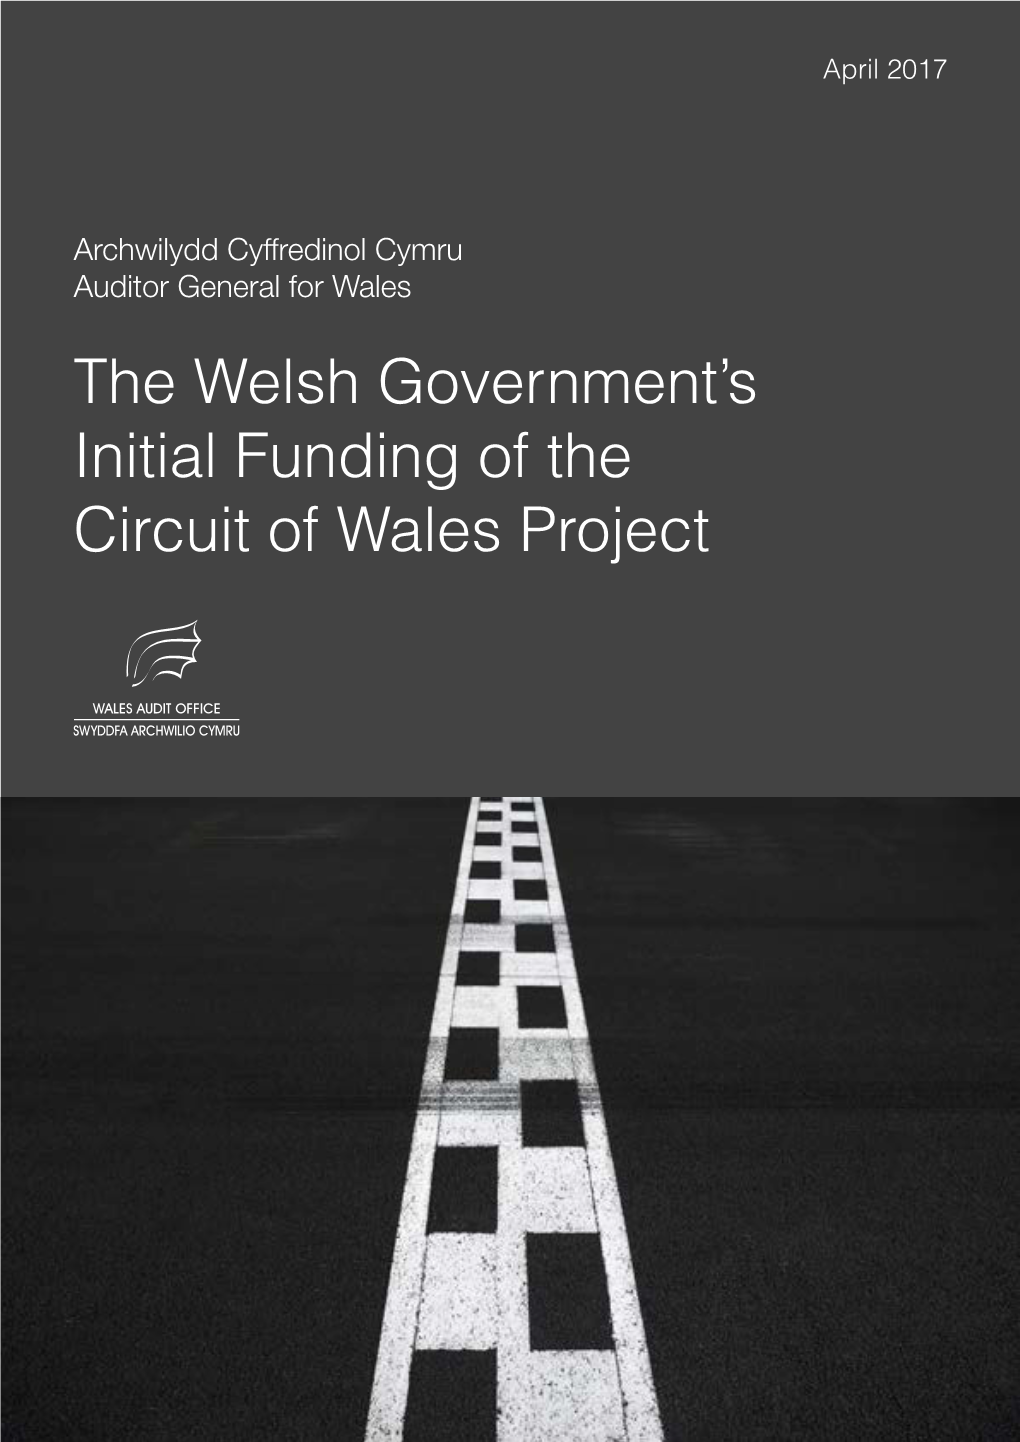 The Welsh Government's Initial Funding of the Circuit of Wales Project